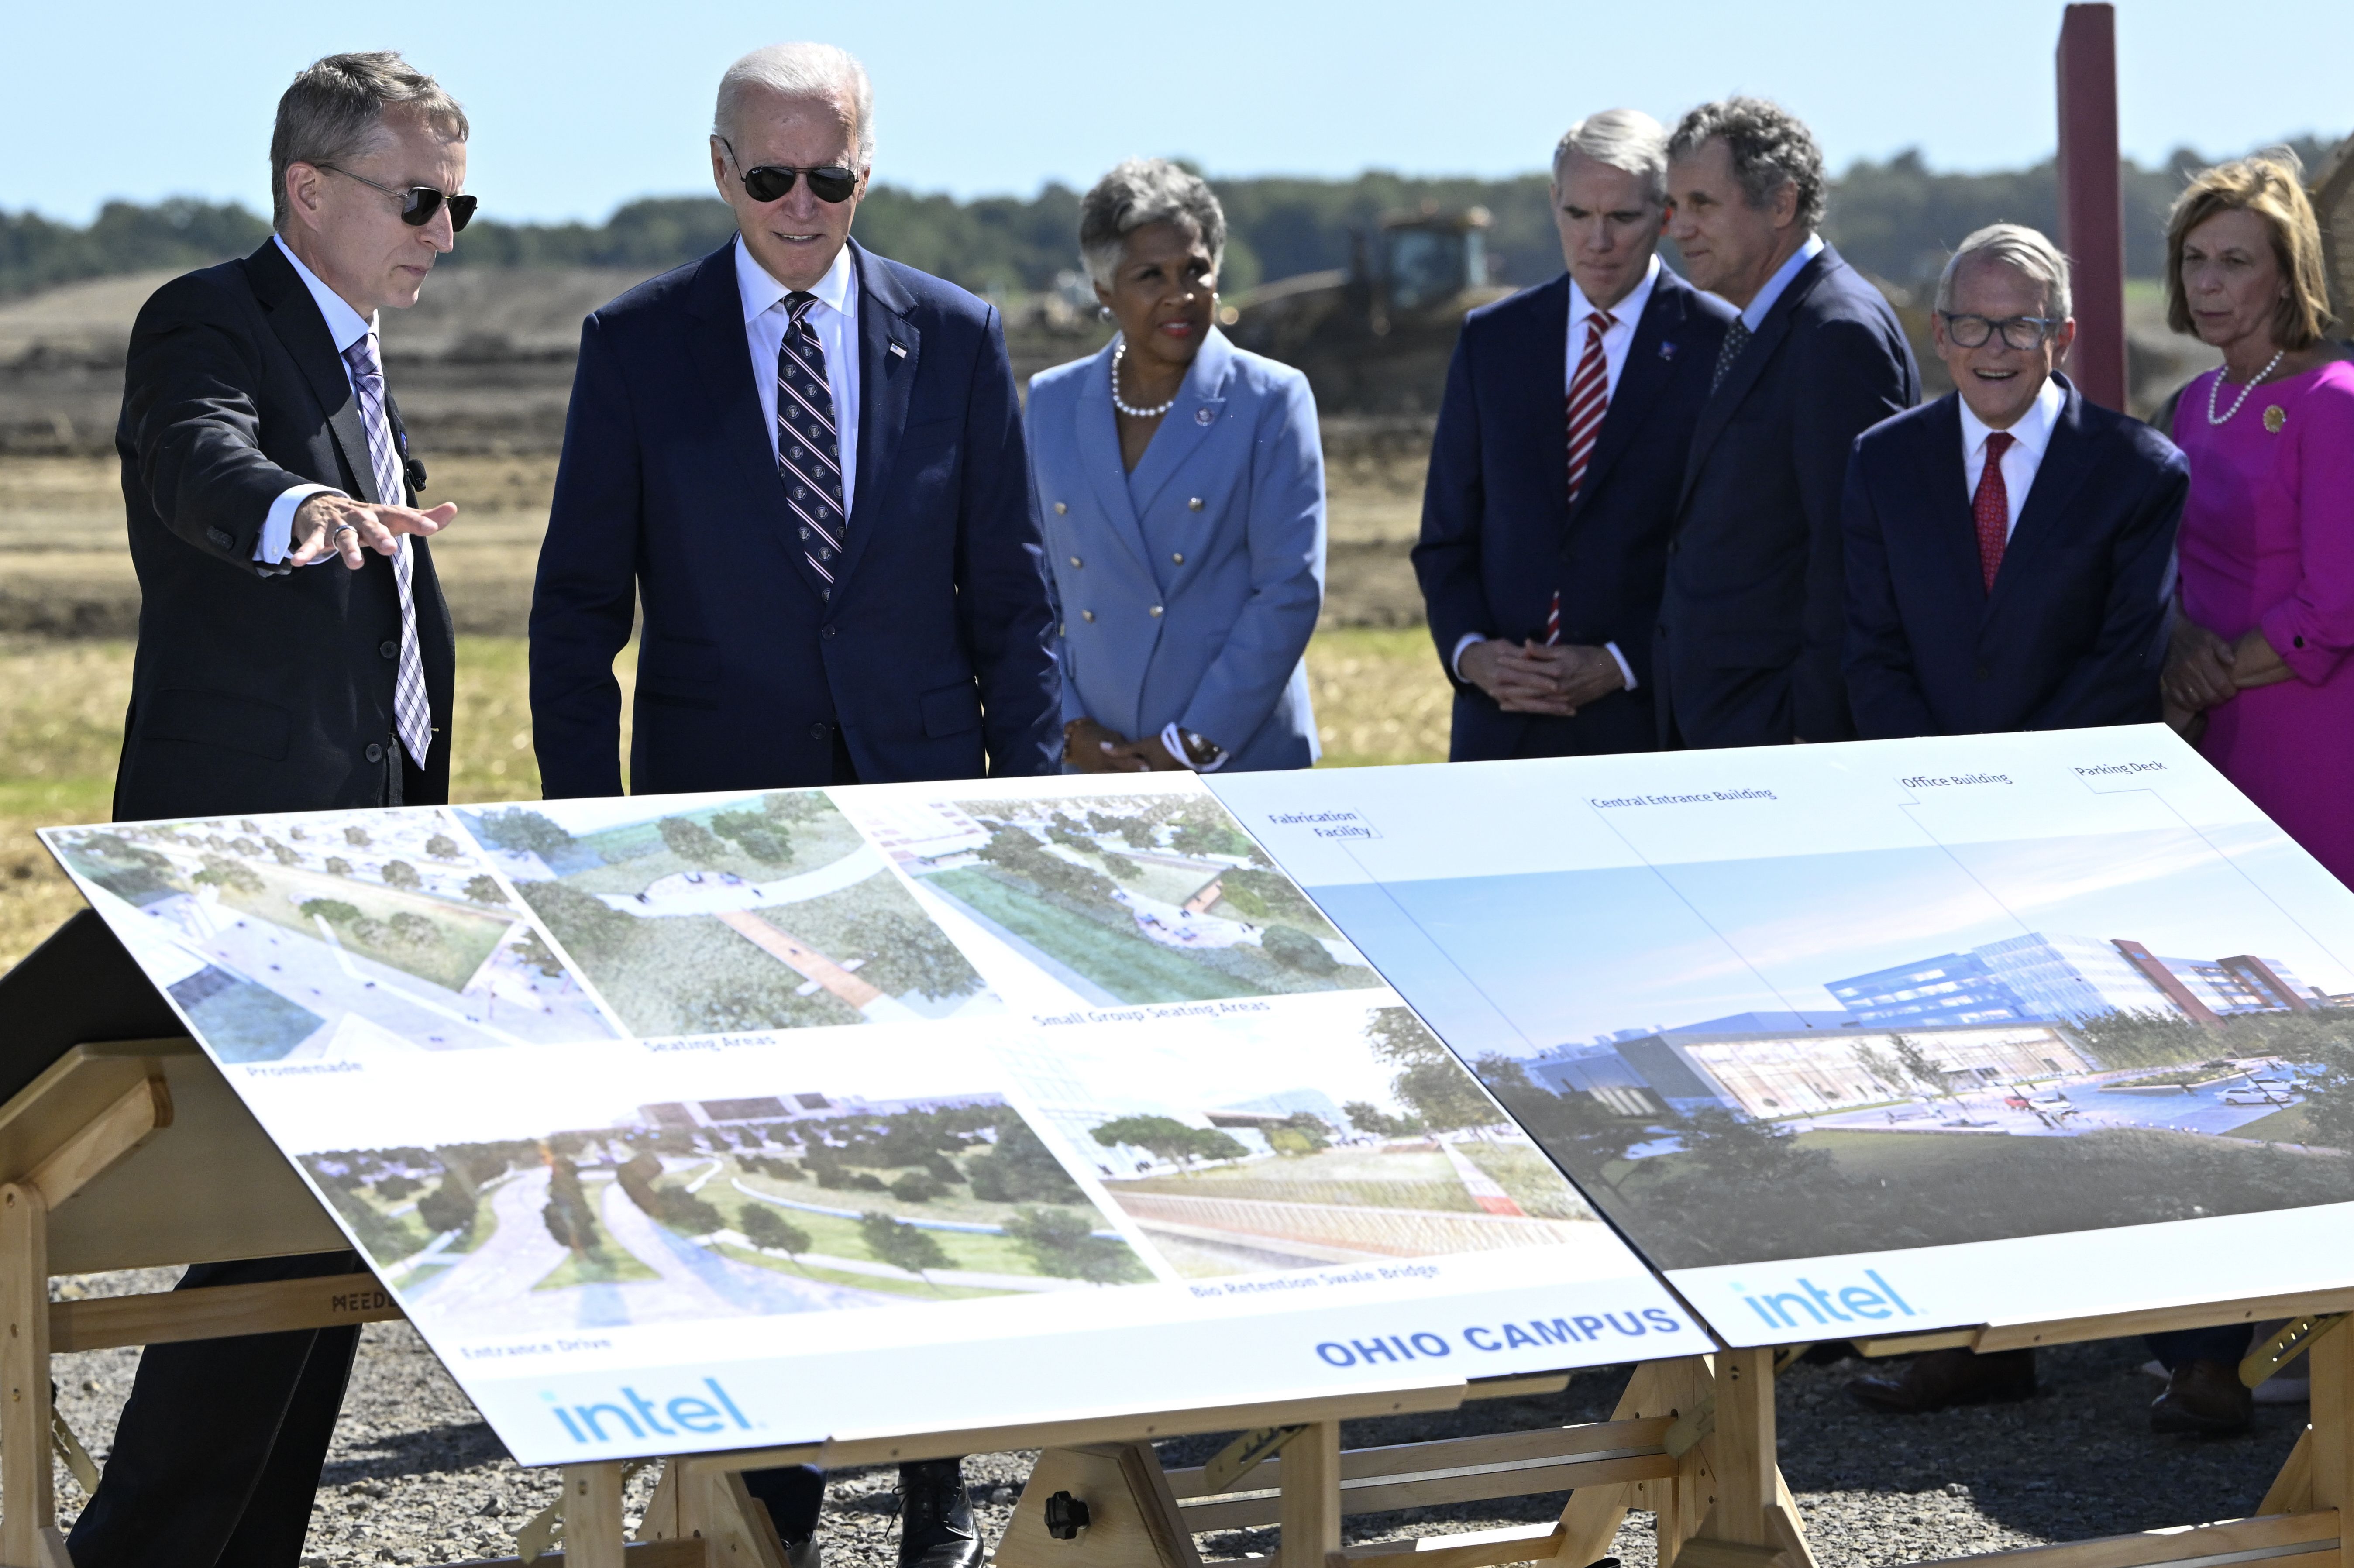 Intel CEO Pat Gelsinger joins President Biden and other Ohio political figures on a tour of the Intel semiconductor manufacturing facility site. 